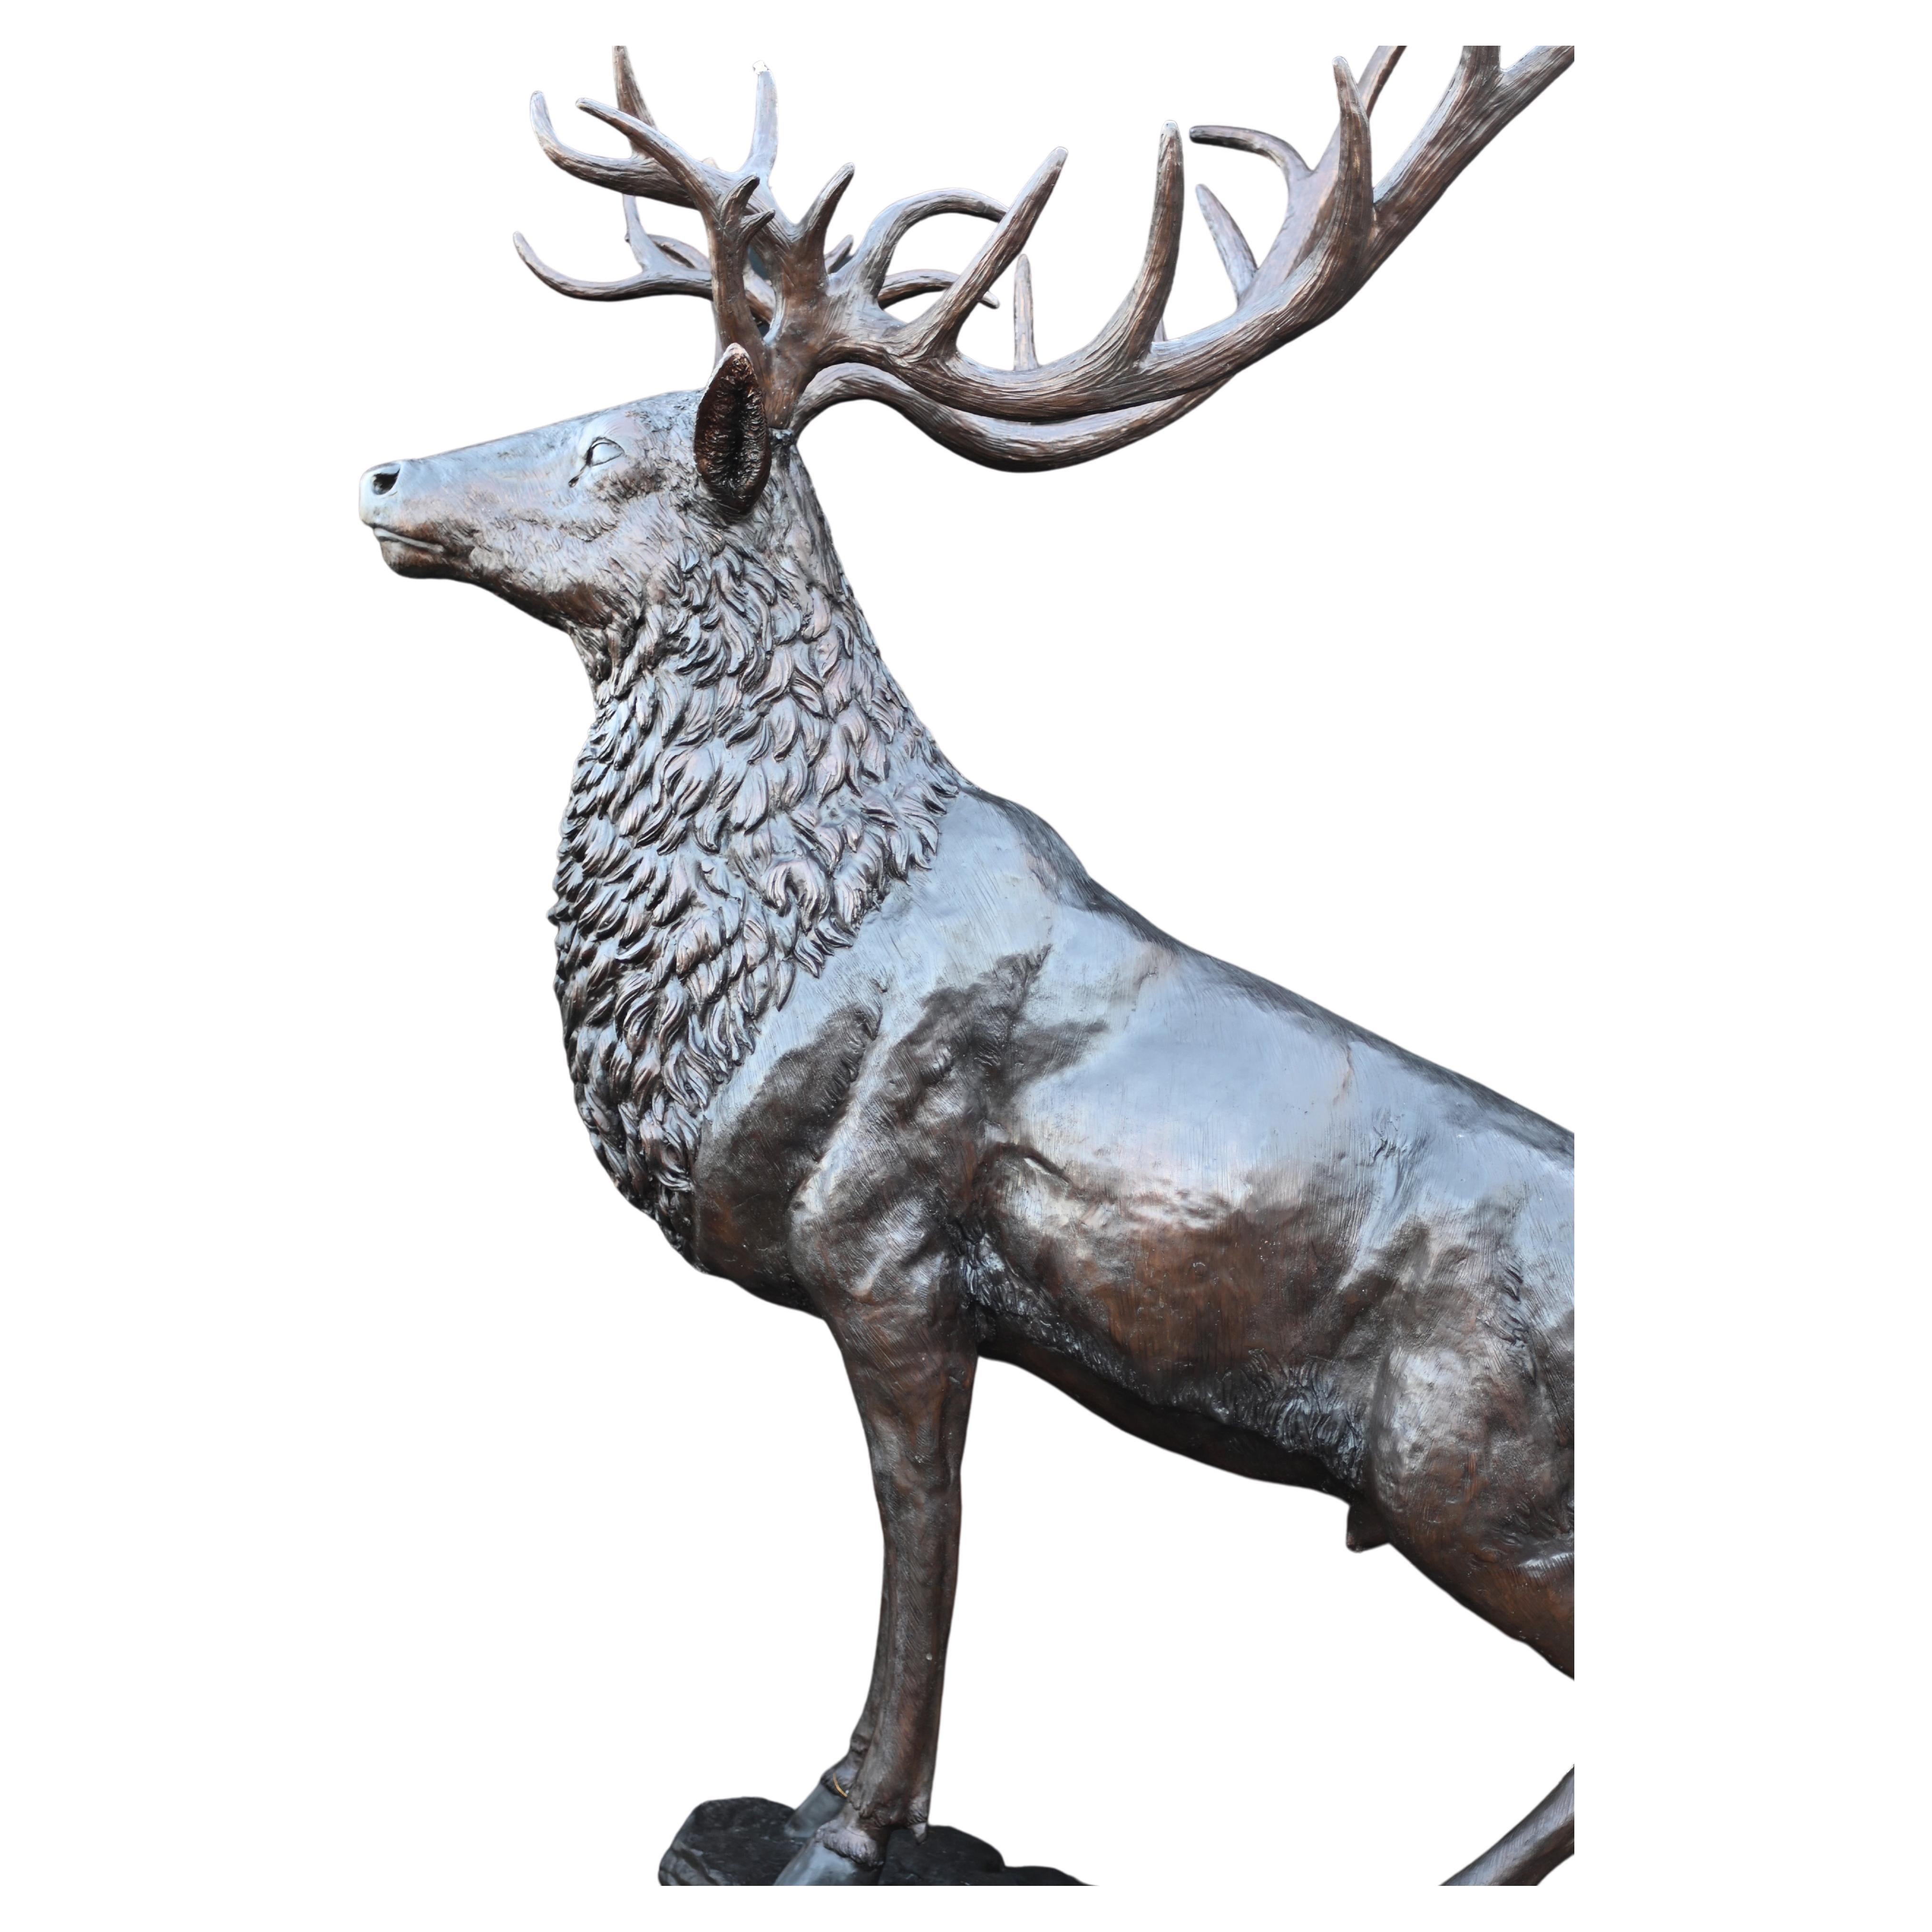 From time to time we find some really big pieces and this is right up there! A giant - almost ten feet tall (292 CM) bronze stag And what a beauty she is standing on the rocky outcrop like a Monarch of the Glen Large antlers and a great patina to